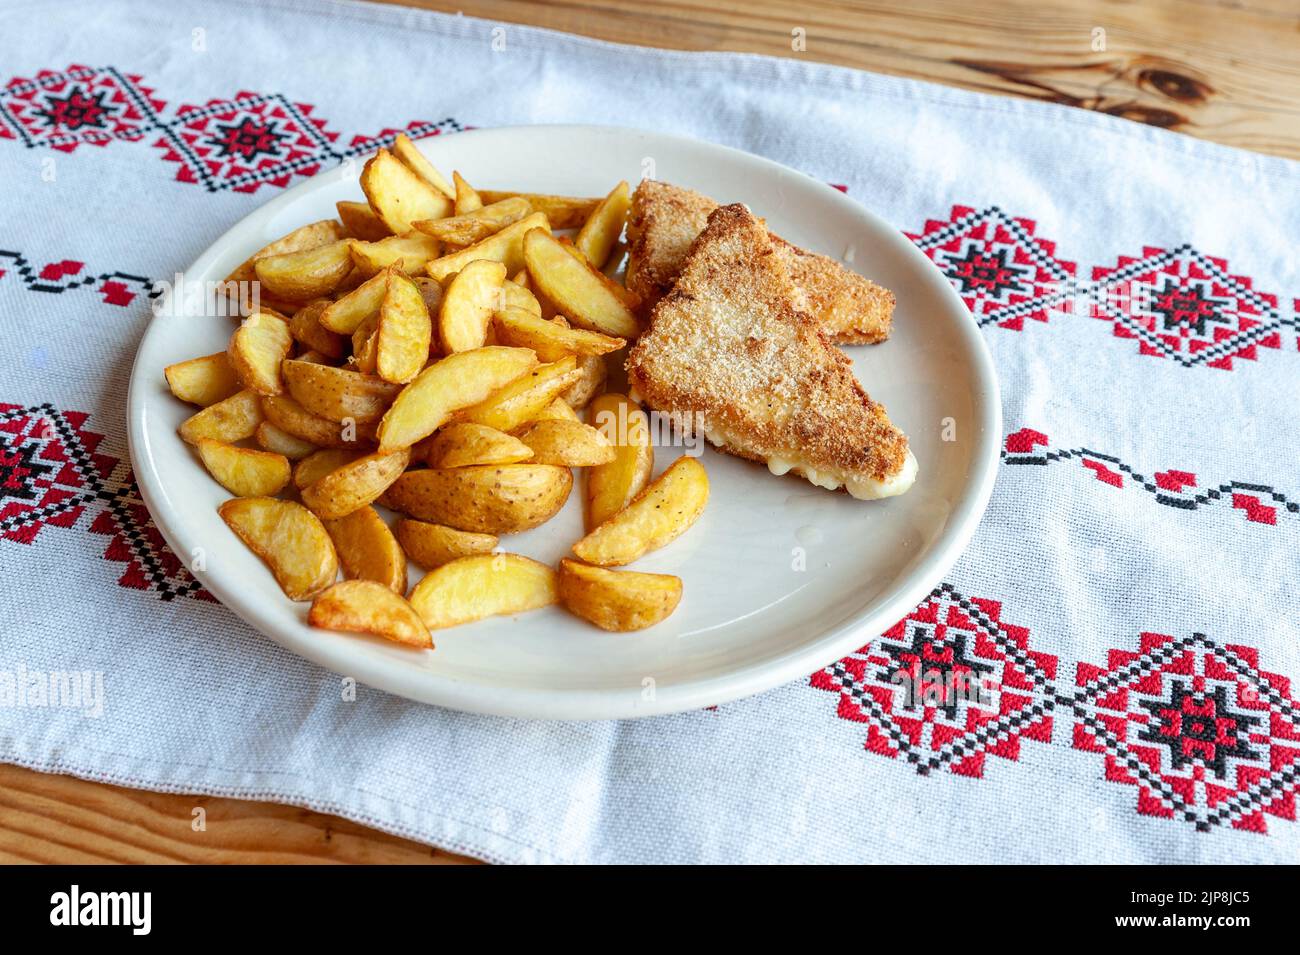 fried cheese served with french fries Stock Photo